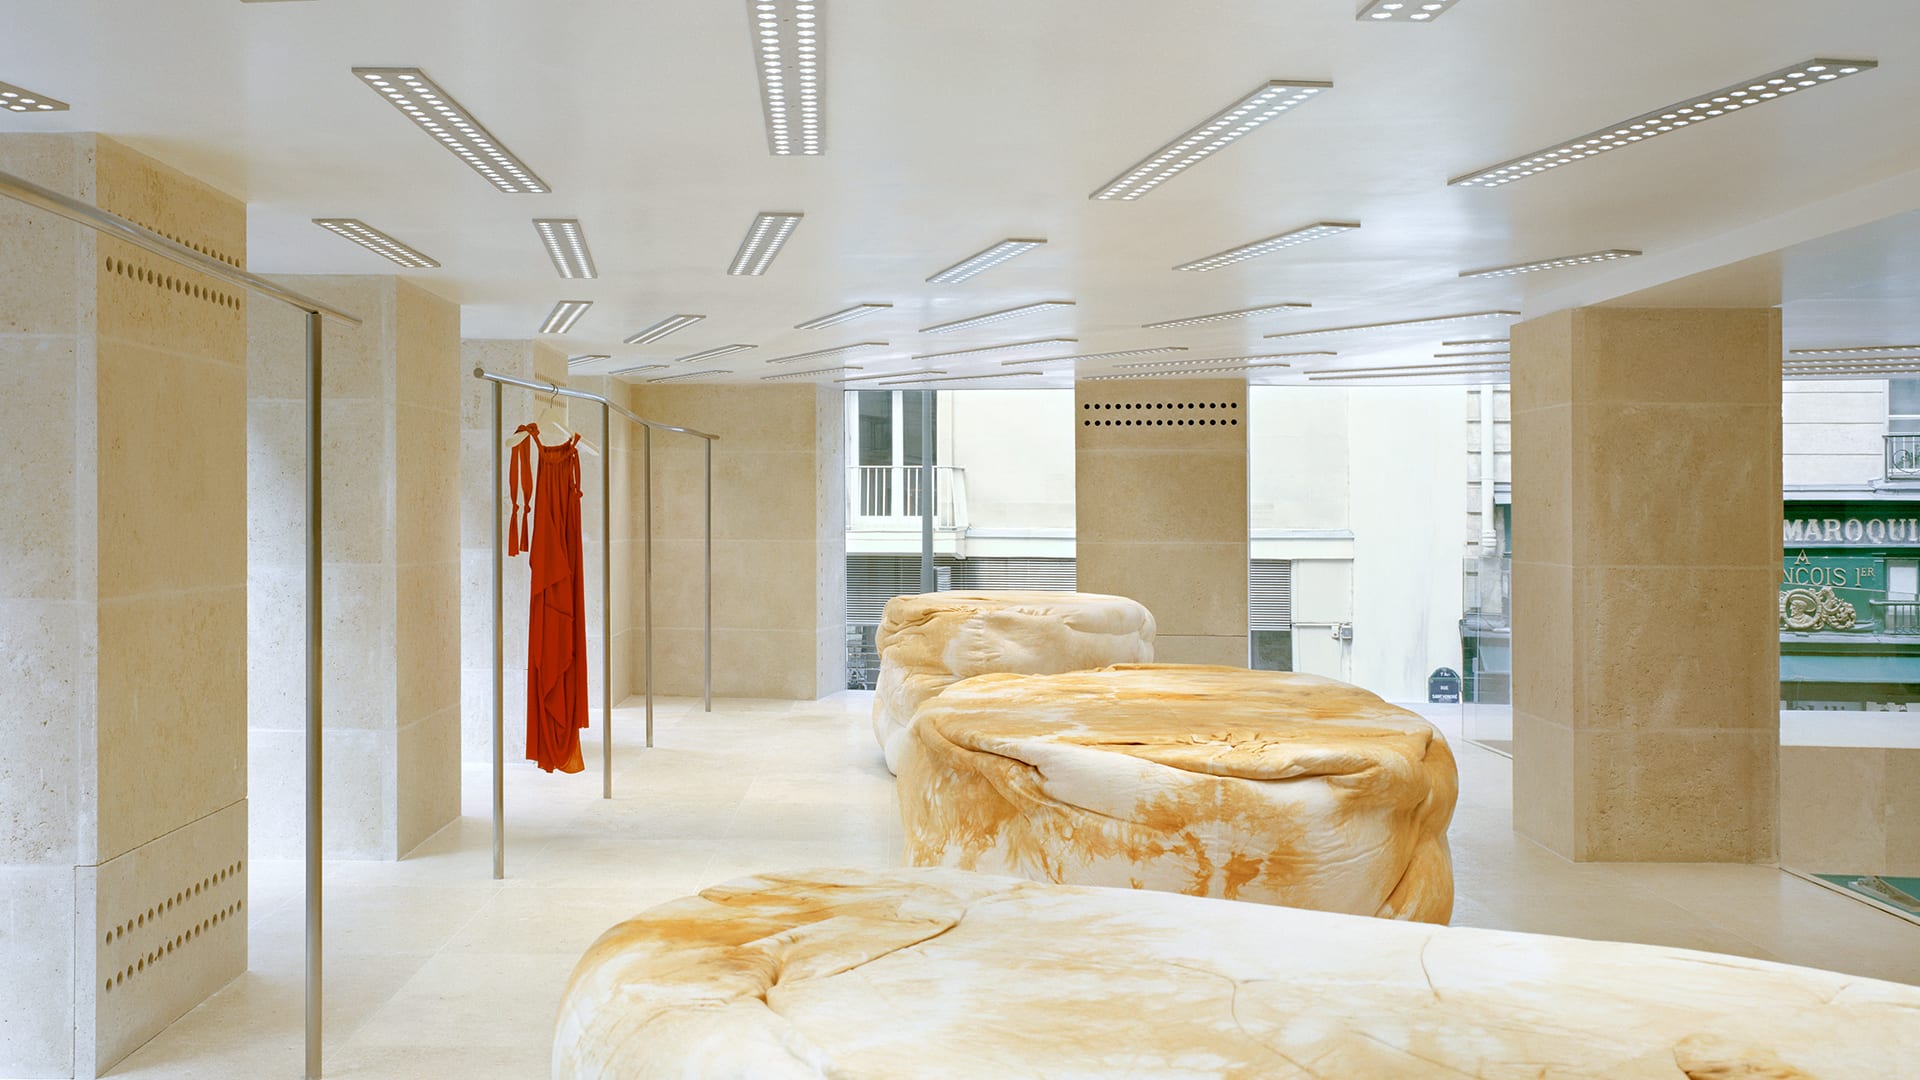 A photo of the new Acne Studios shopping location in Paris